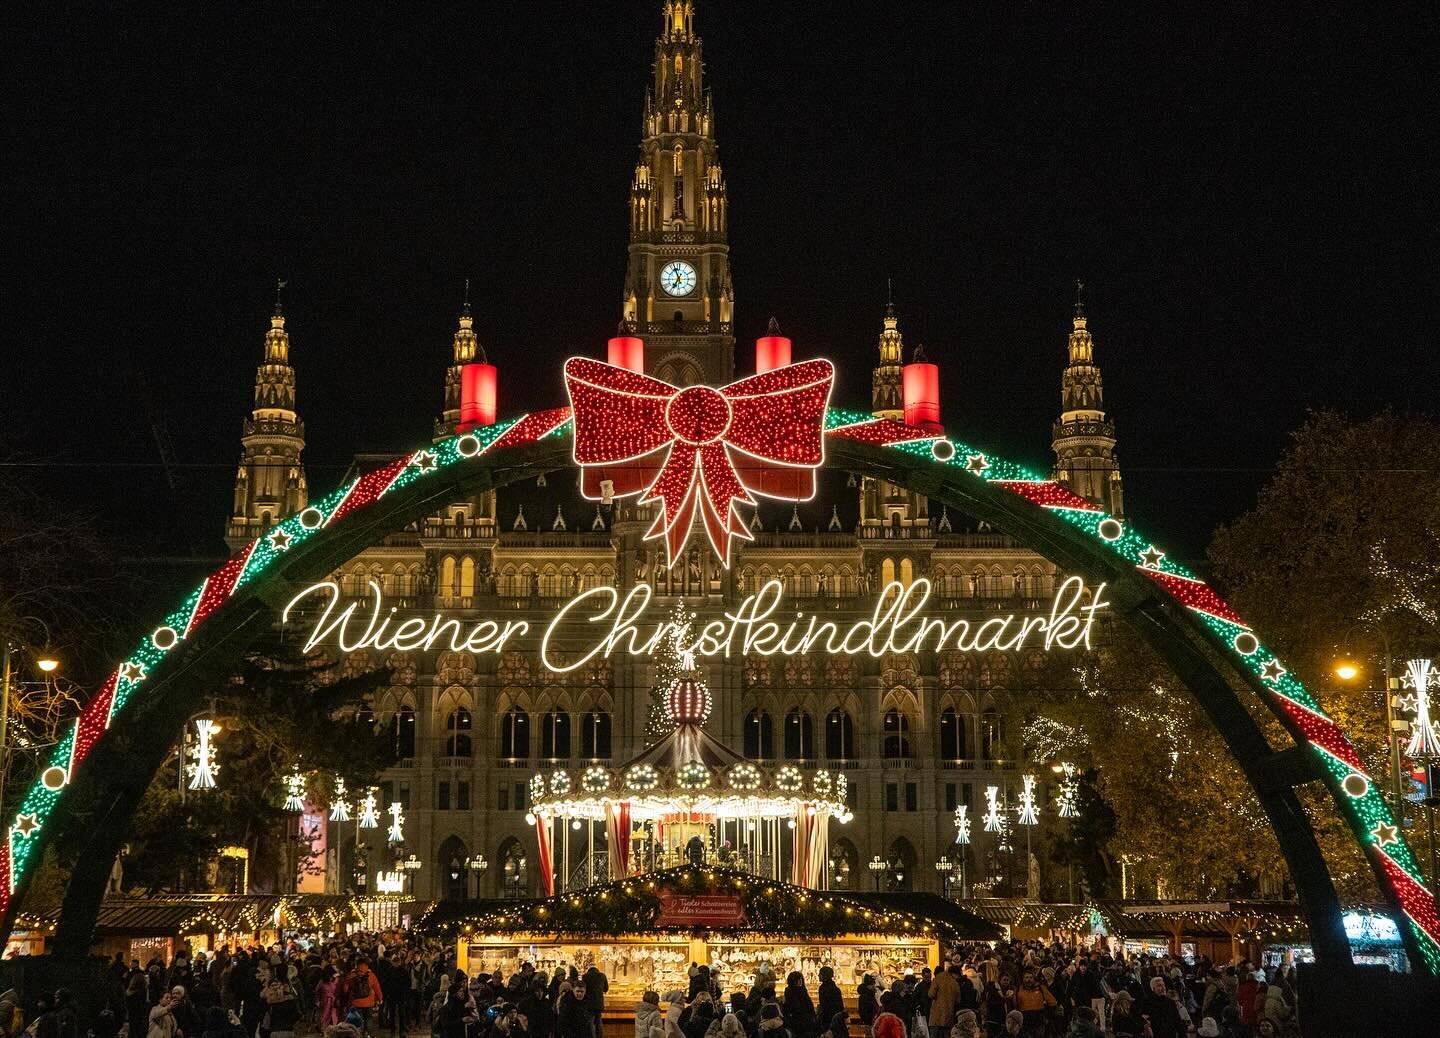 Christkindlmarkt, the largest Market in Vienna, did not disappoint. With the spectacular City Hall as the backdrop, Rathausplatz square is filled to the brim with Christmas booths, a merry-go-round, a skating rink, and a Ferris wheel. 

As the clock 